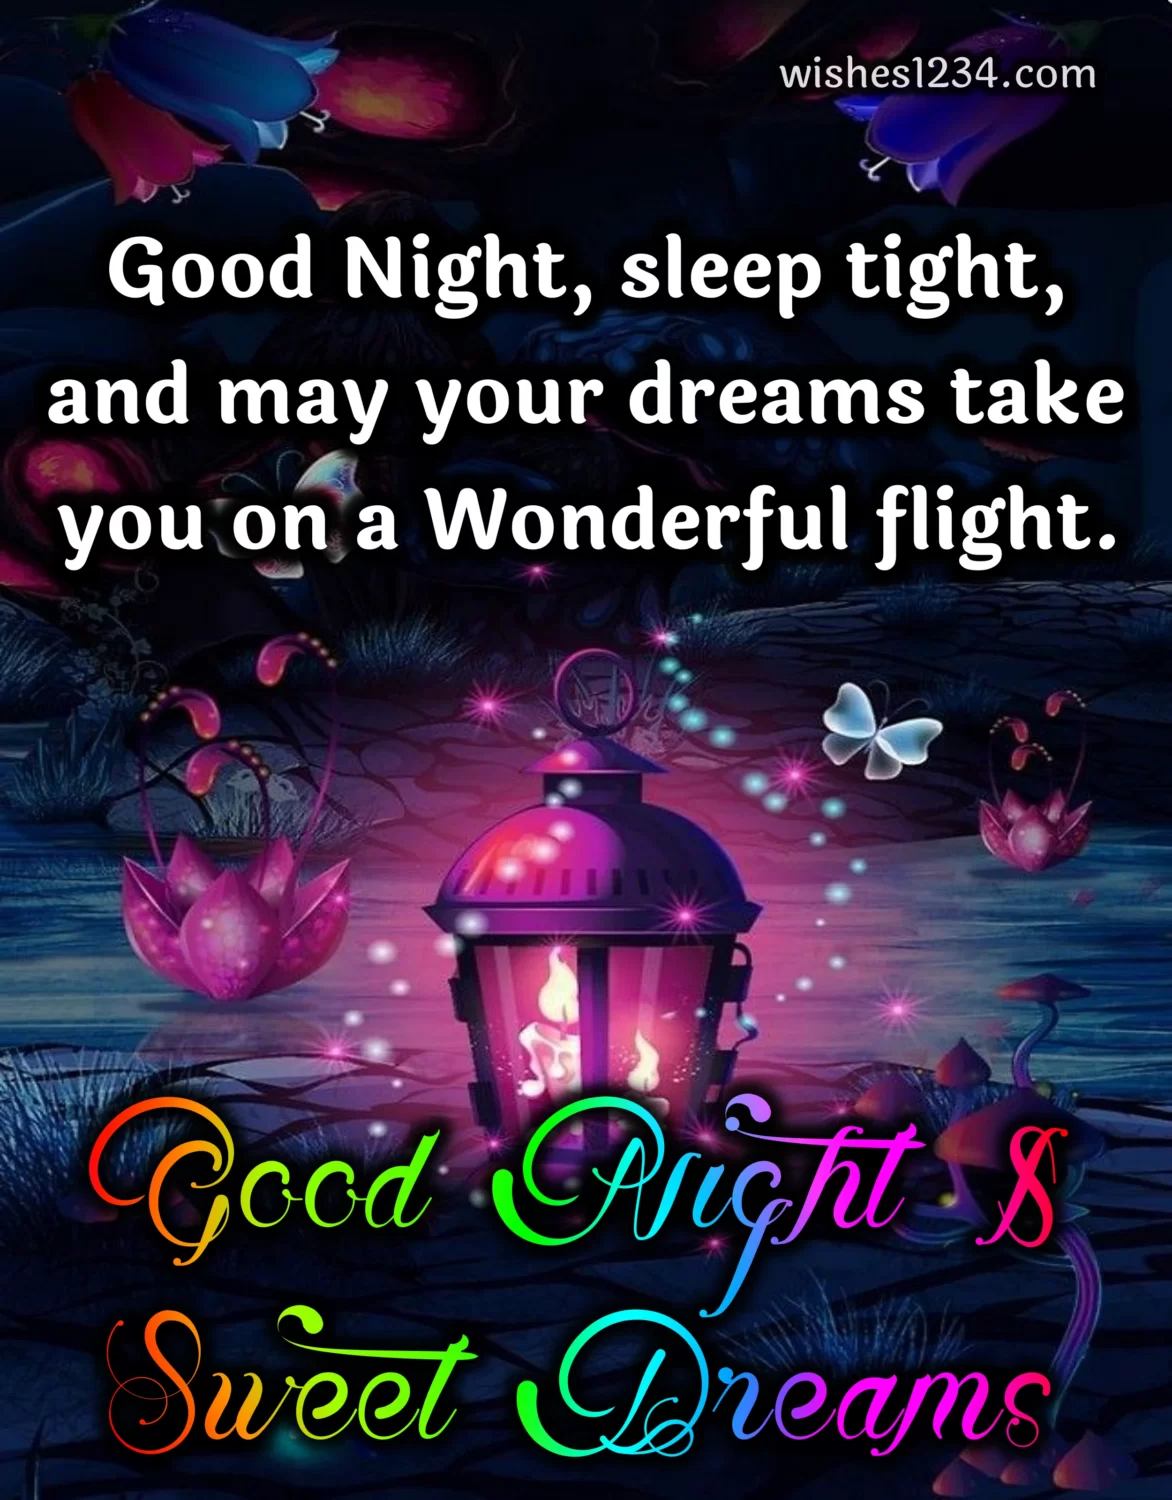 Good night quotes with fantasy background, Good Night Quotes.